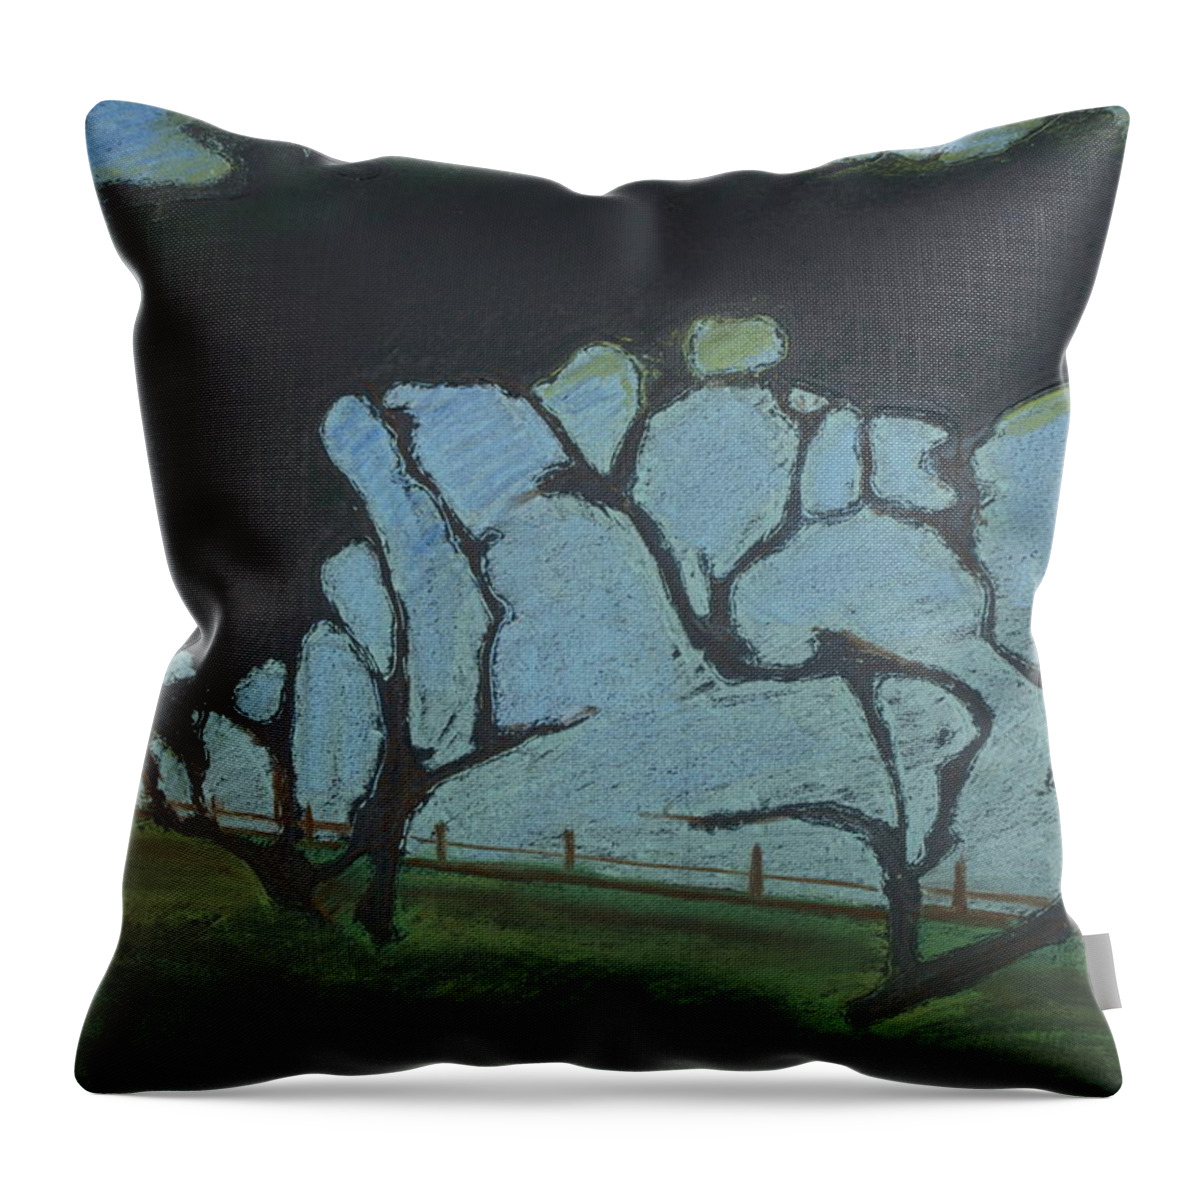 Contemporary Tree Landscape Throw Pillow featuring the mixed media La Jolla III by Leah Tomaino